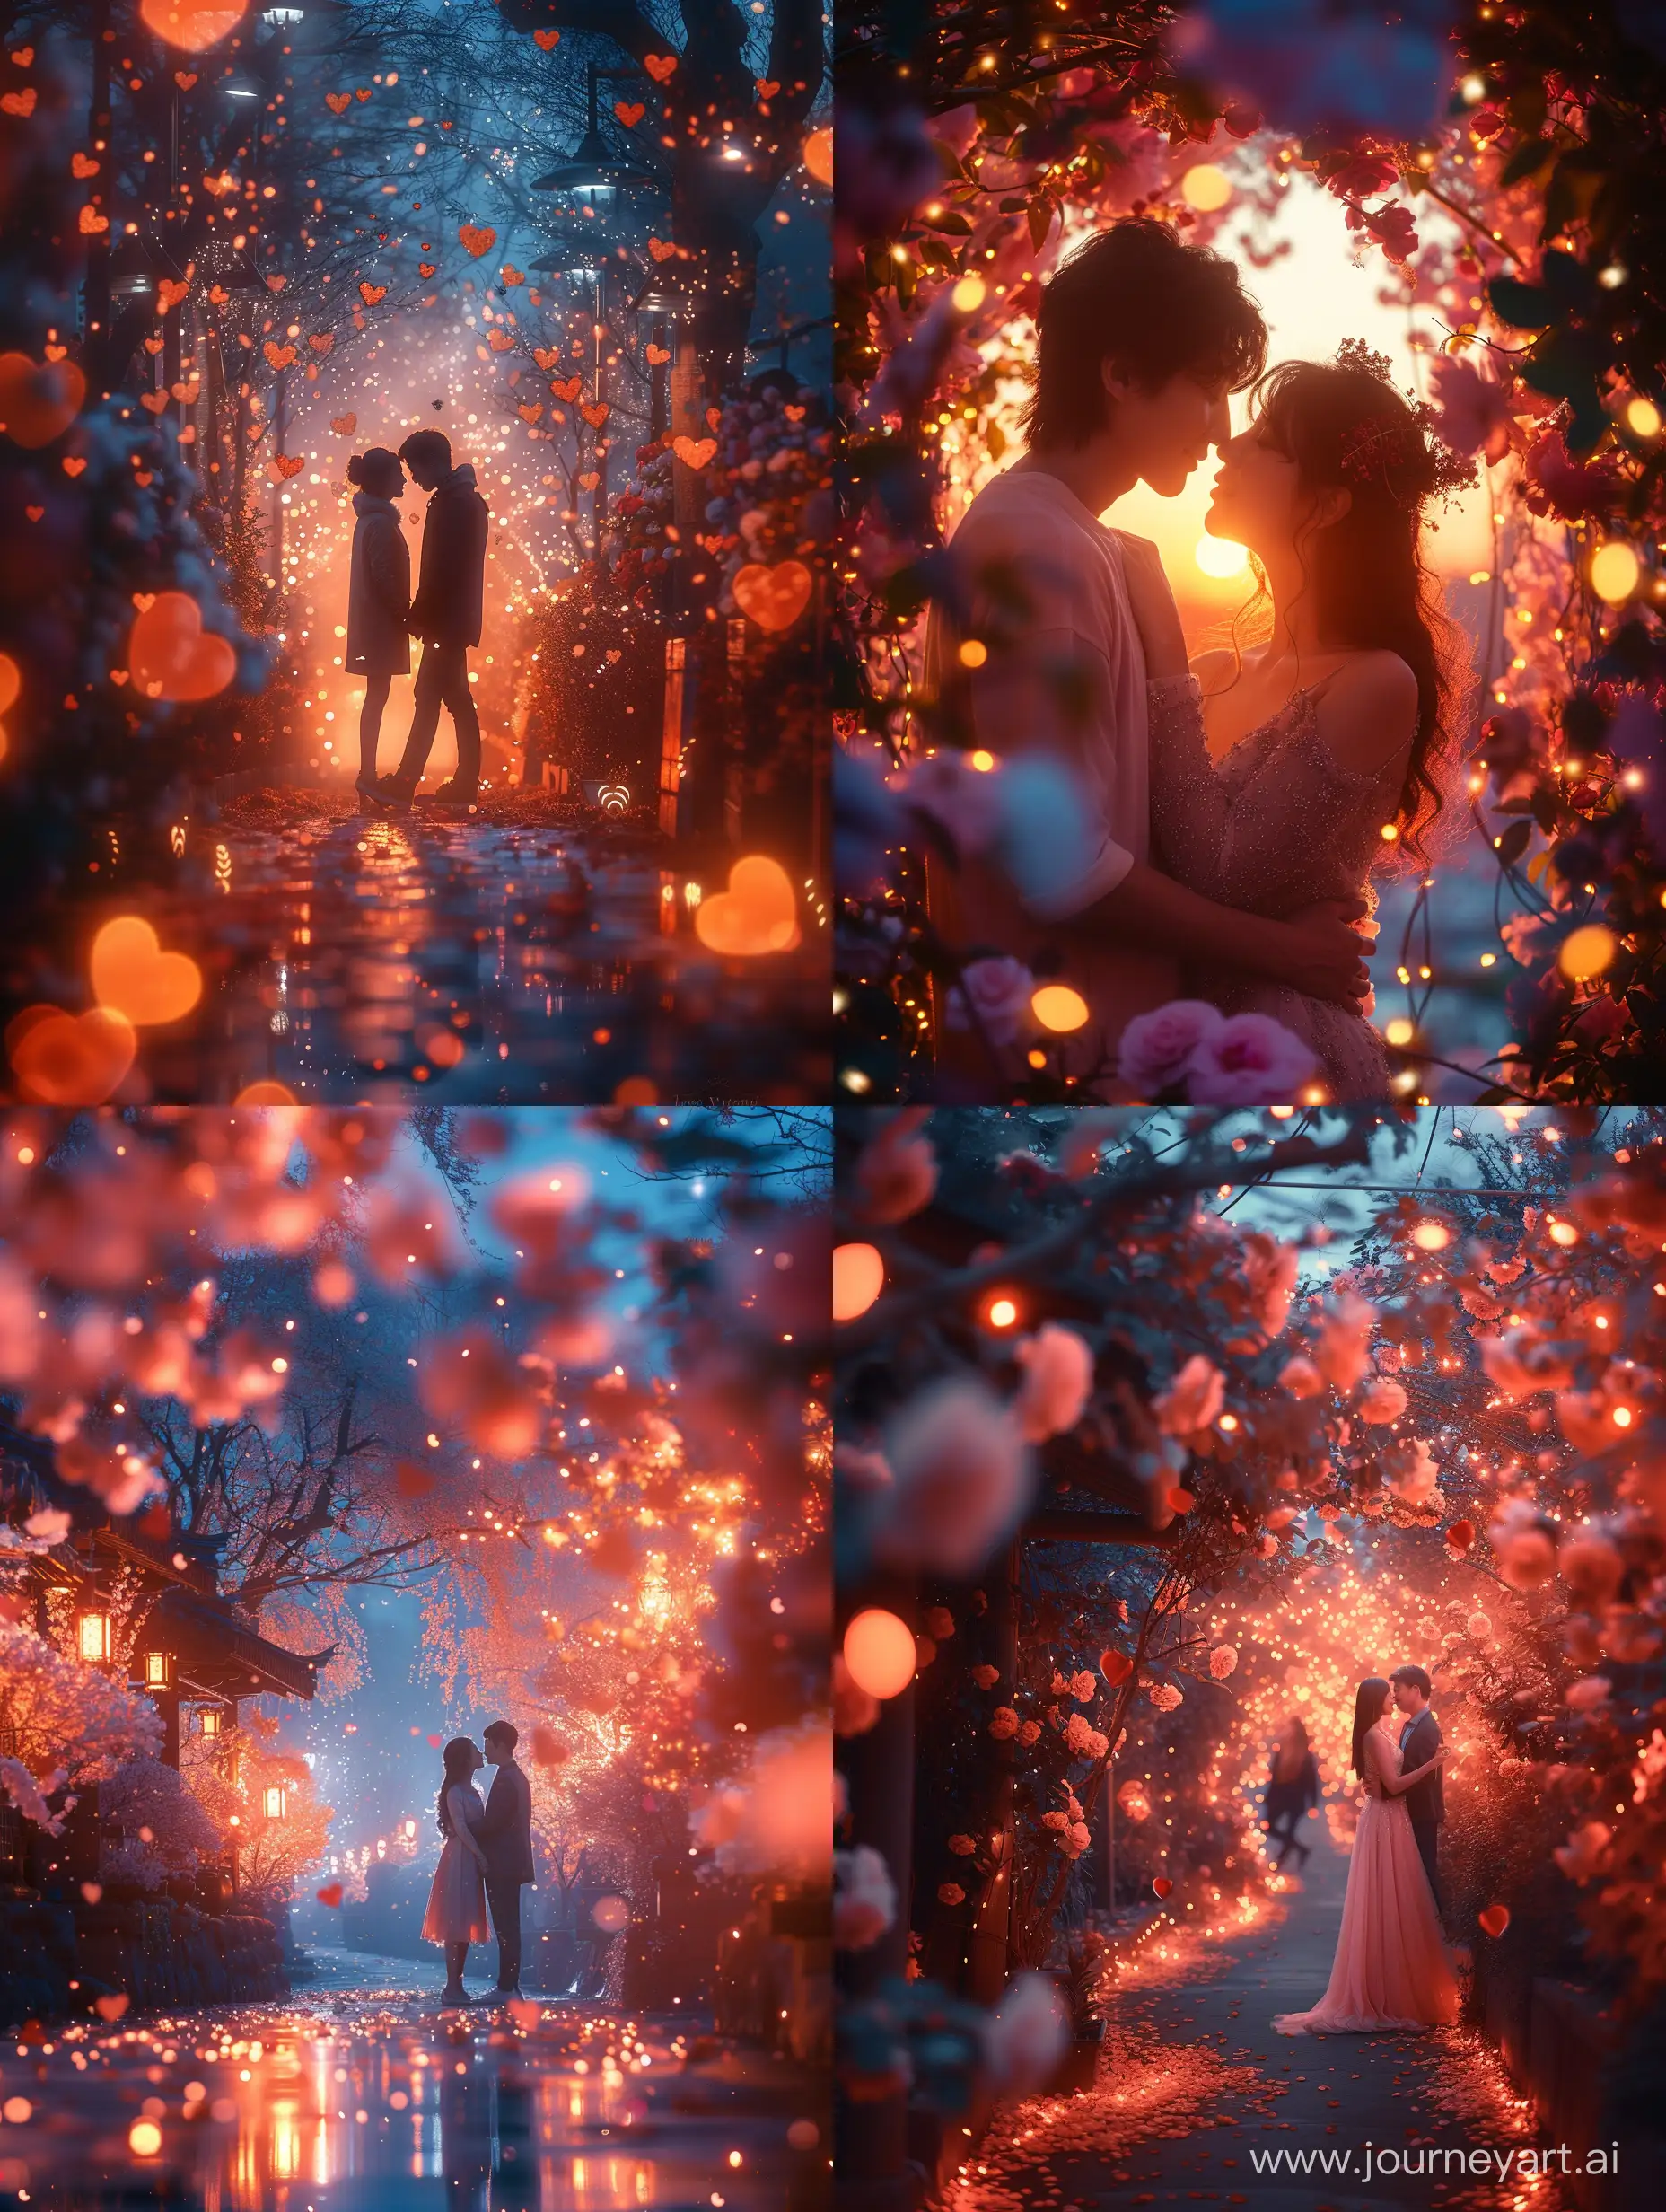 Enchanting-Sunset-Romance-Loving-Couple-Embracing-Amidst-Blooming-Flowers-and-Candlelight